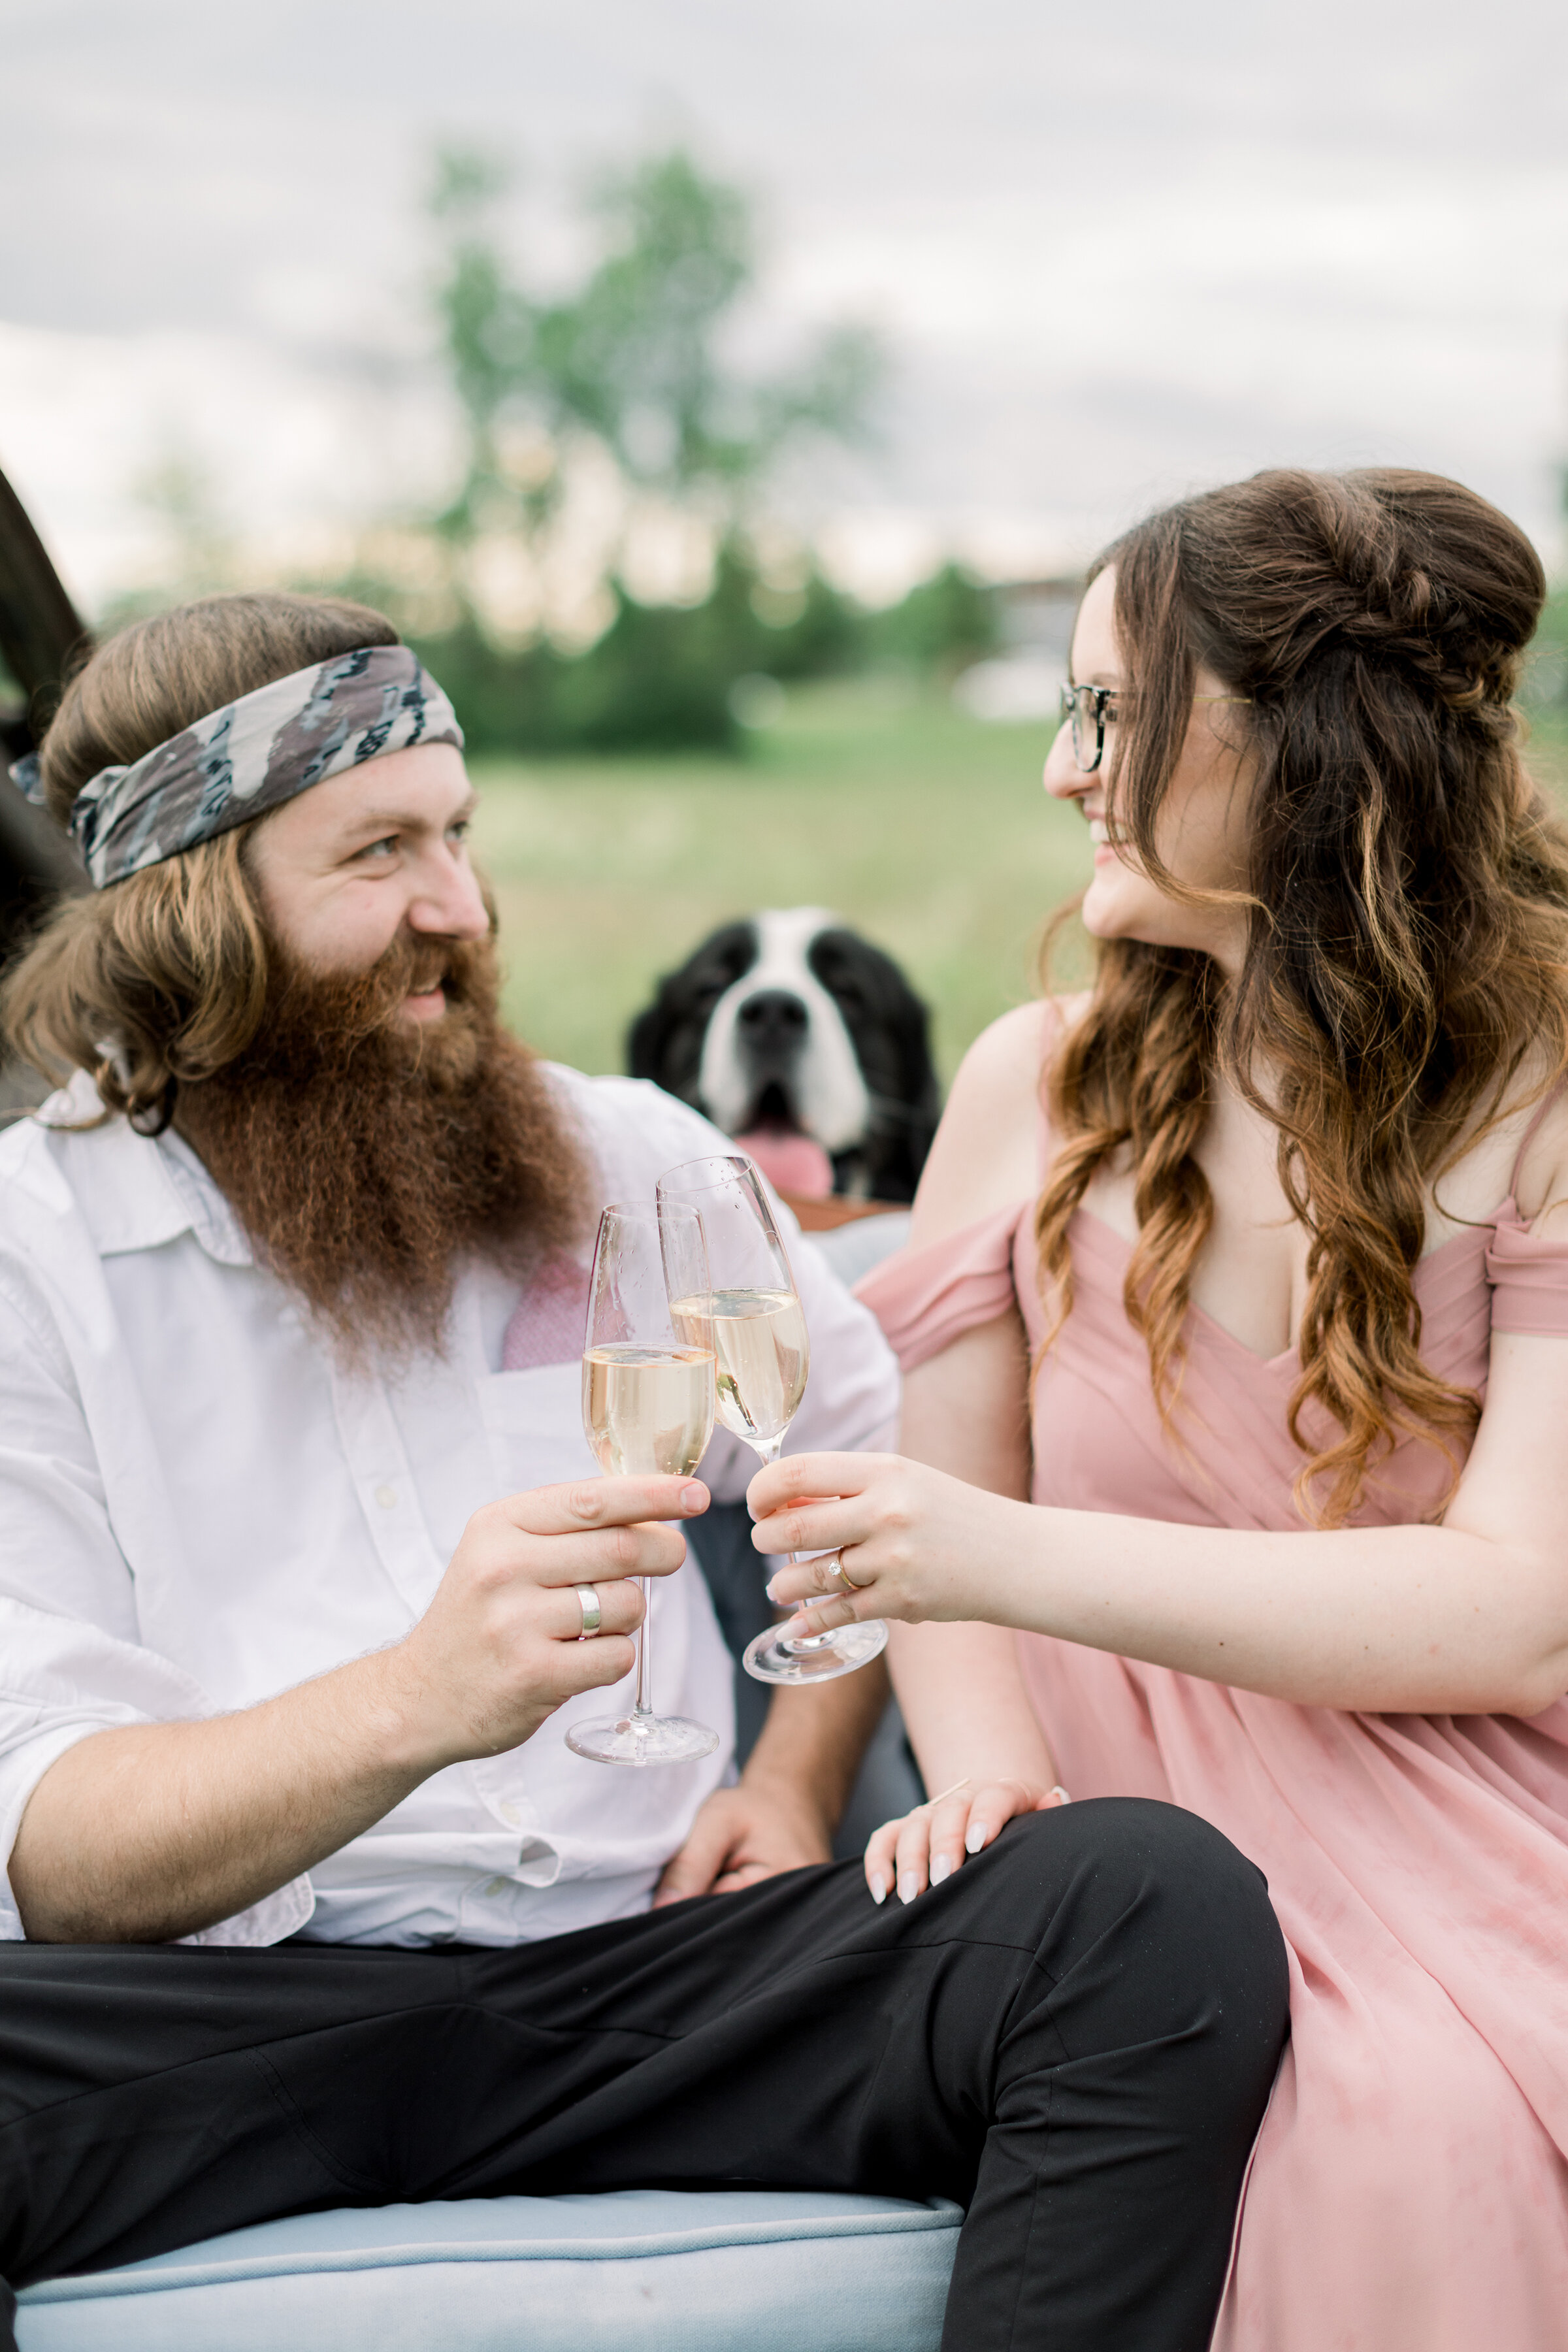  Cheers to a wonderful new life together in a beautiful rustic outdoor engagement session by Chelsea Mason Photography. Couple goals engagement session ideas and inspiration for fun and unique session Smith Falls, Ontario Canada couple pose inspirati